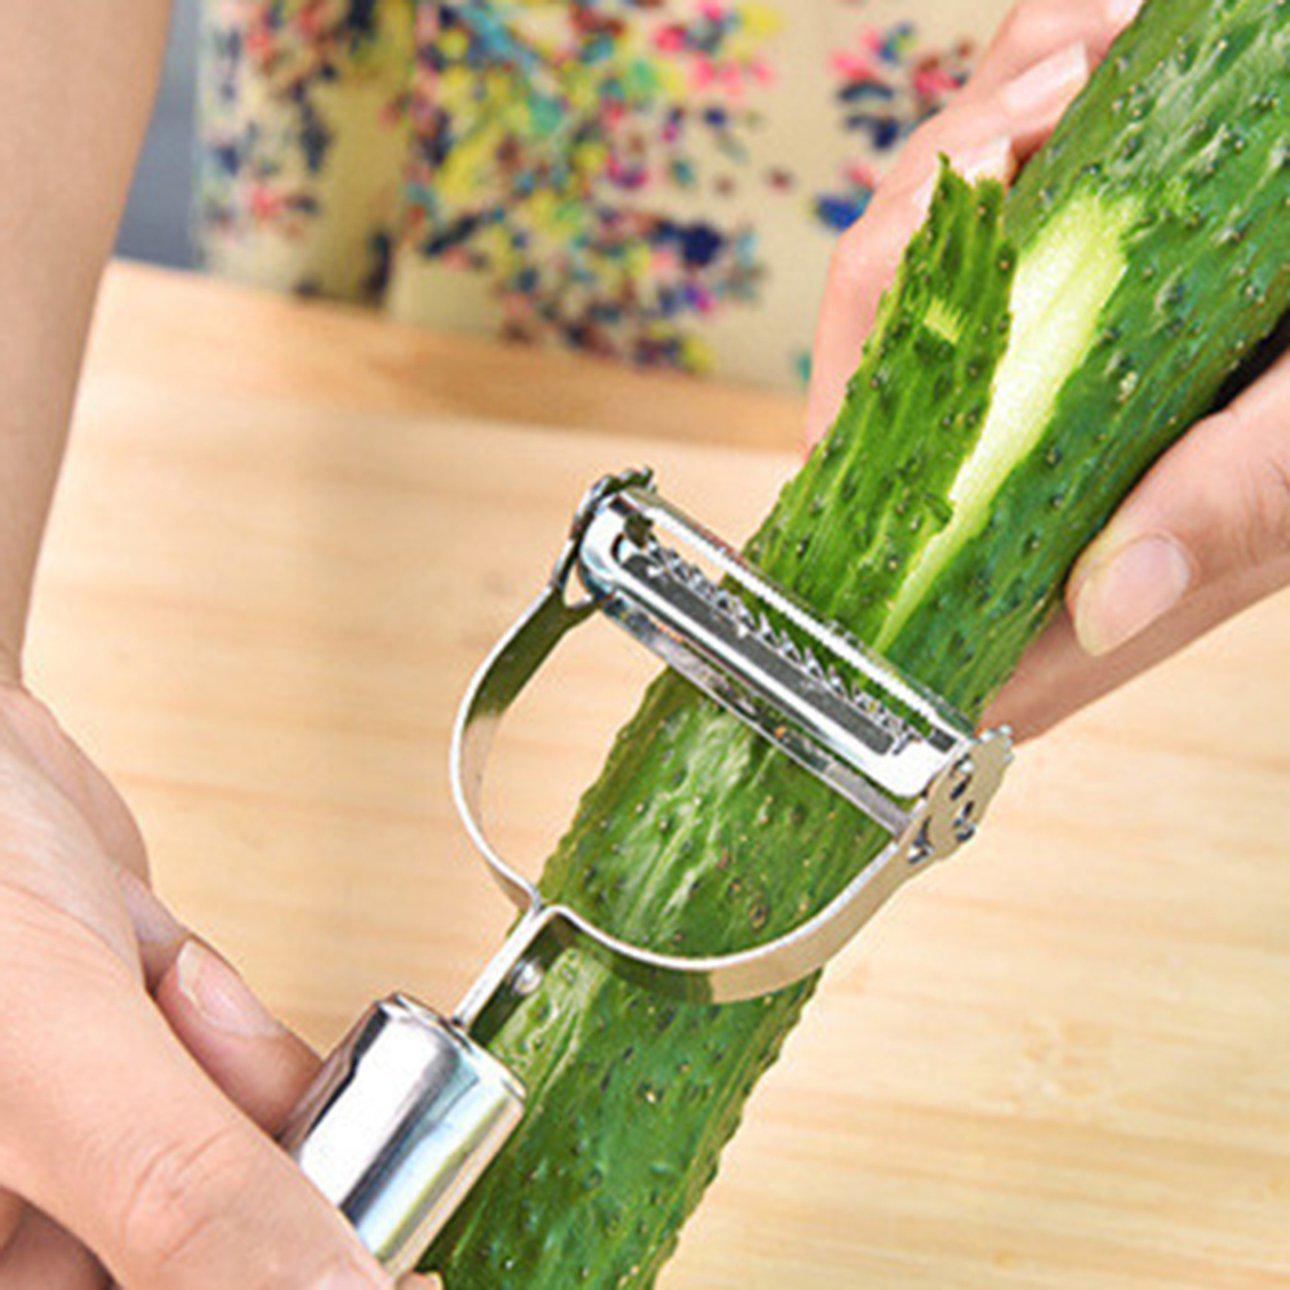 (🎄Christmas Hot Sale🔥🔥)Stainless Steel Peeler(BUY 5 GET 3 FREE & FREE SHIPPING)